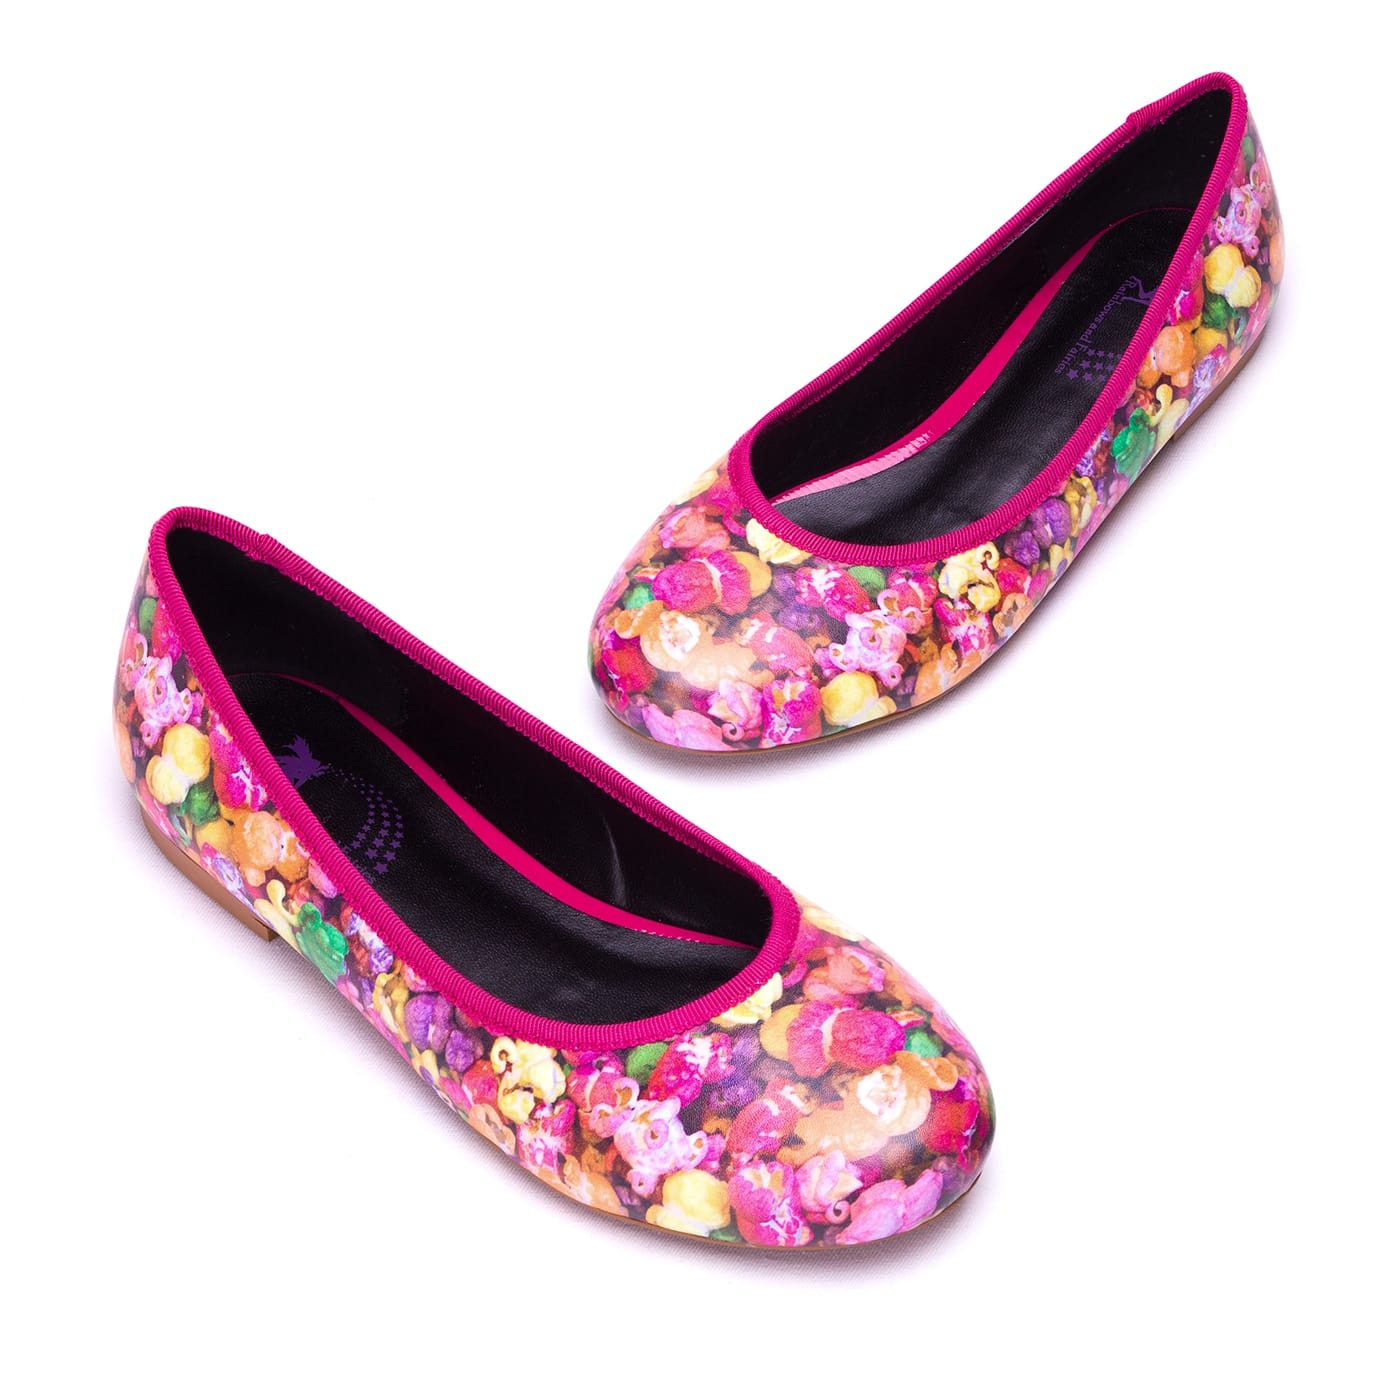 Rainbow Popcorn Ballet Flats by RainbowsAndFairies.com (Popcorn - Colourful - Lollies - Quirky Shoes - Slip Ons - Comfy Flats) - SKU: FW_BALET_PCORN_ORG - Pic 01